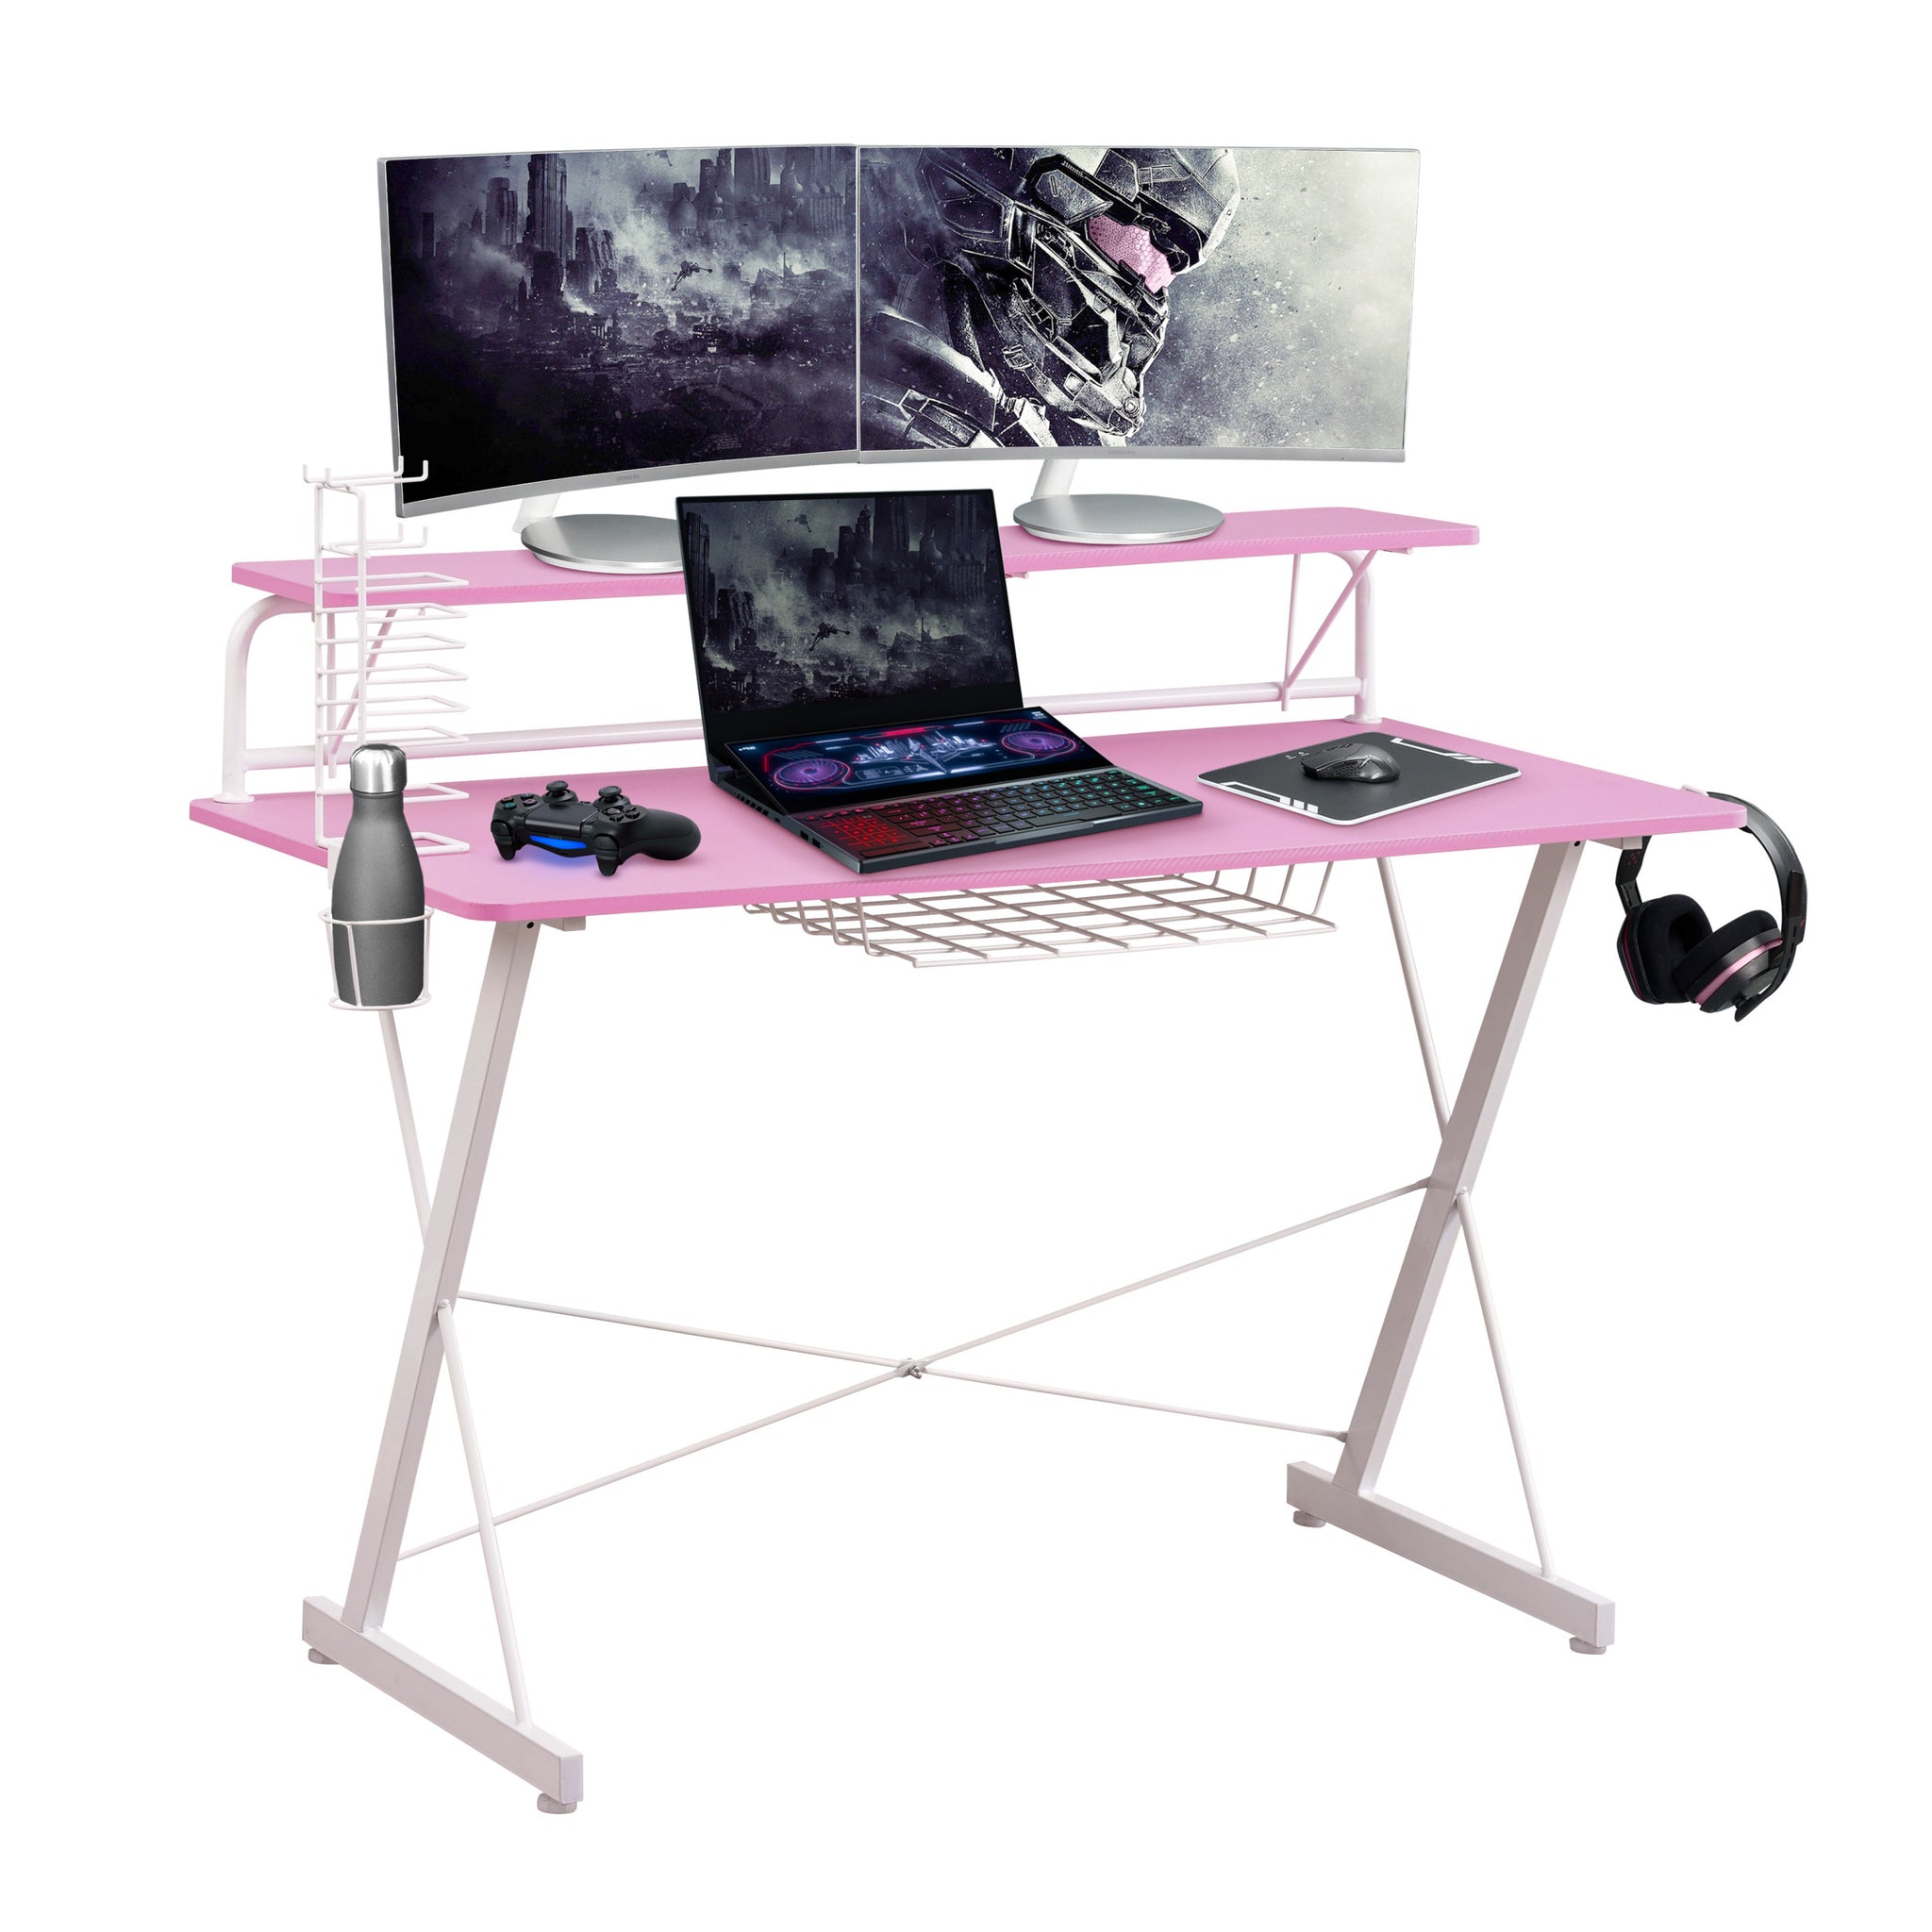 Techni Sport TS 200 Carbon Computer Gaming Desk with